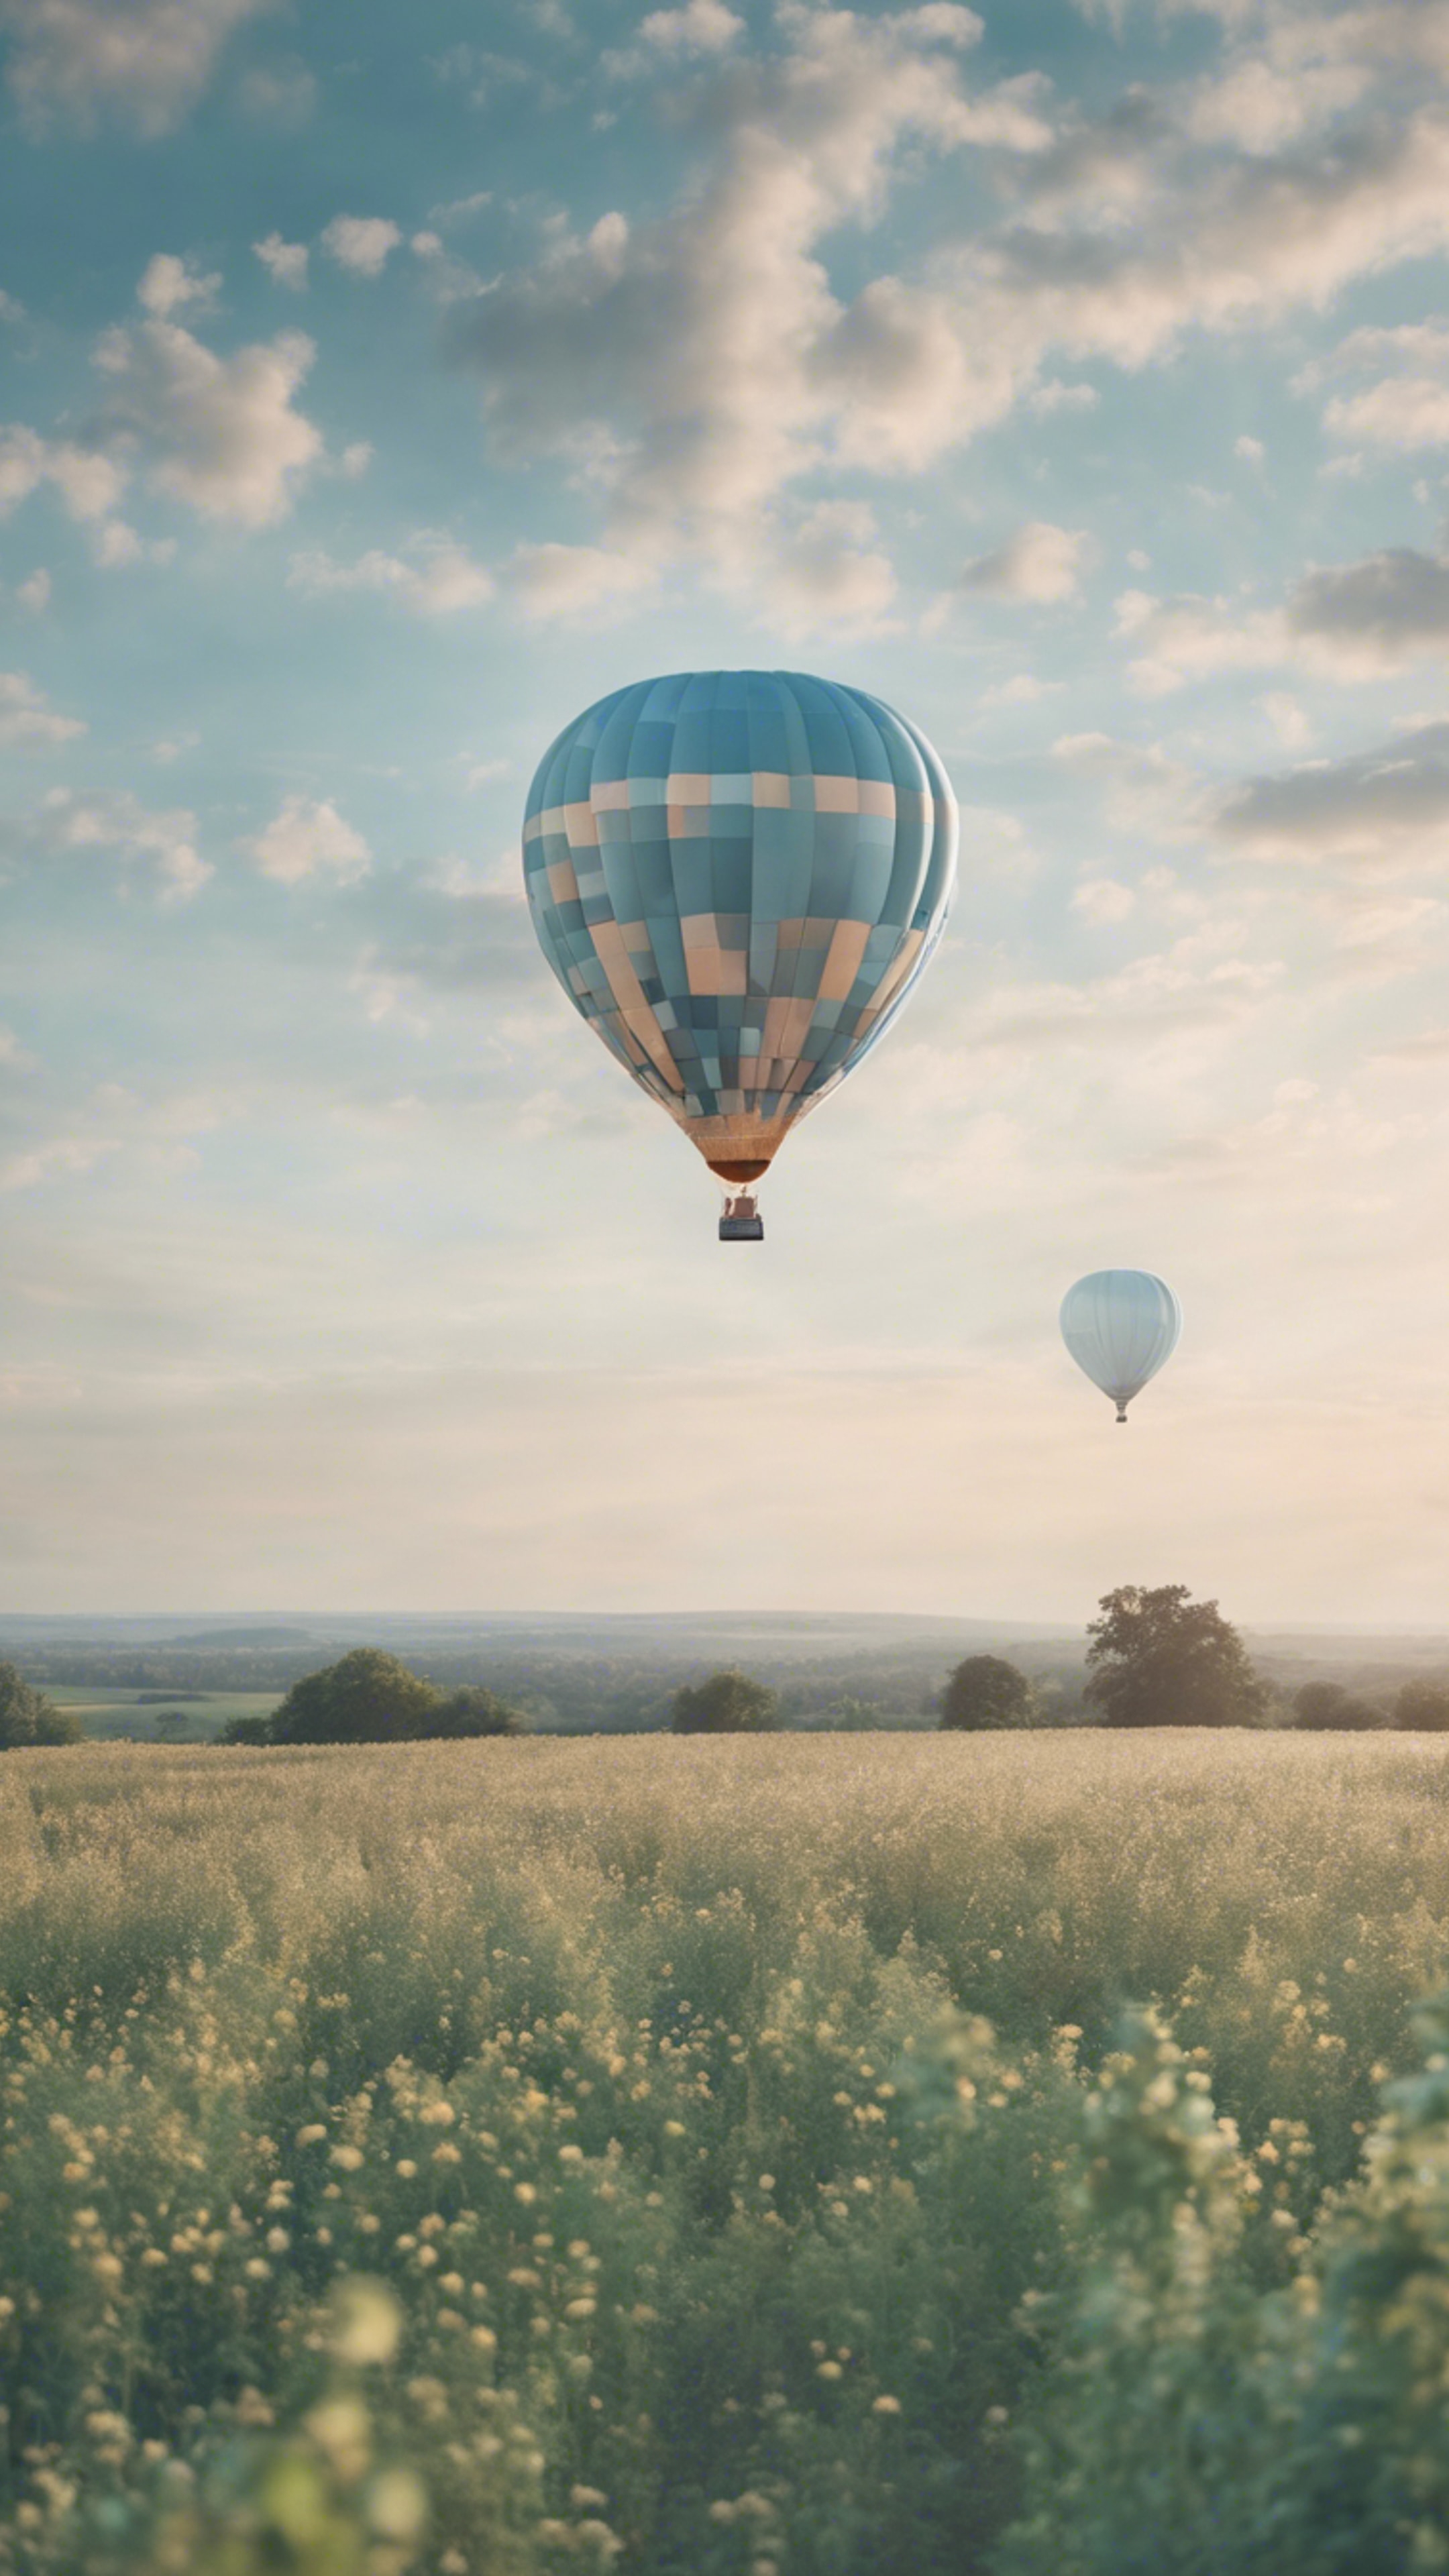 A pastel blue hot air balloon floating serenely above a patchwork field. Papel de parede[b19c340976c044f4b3c6]